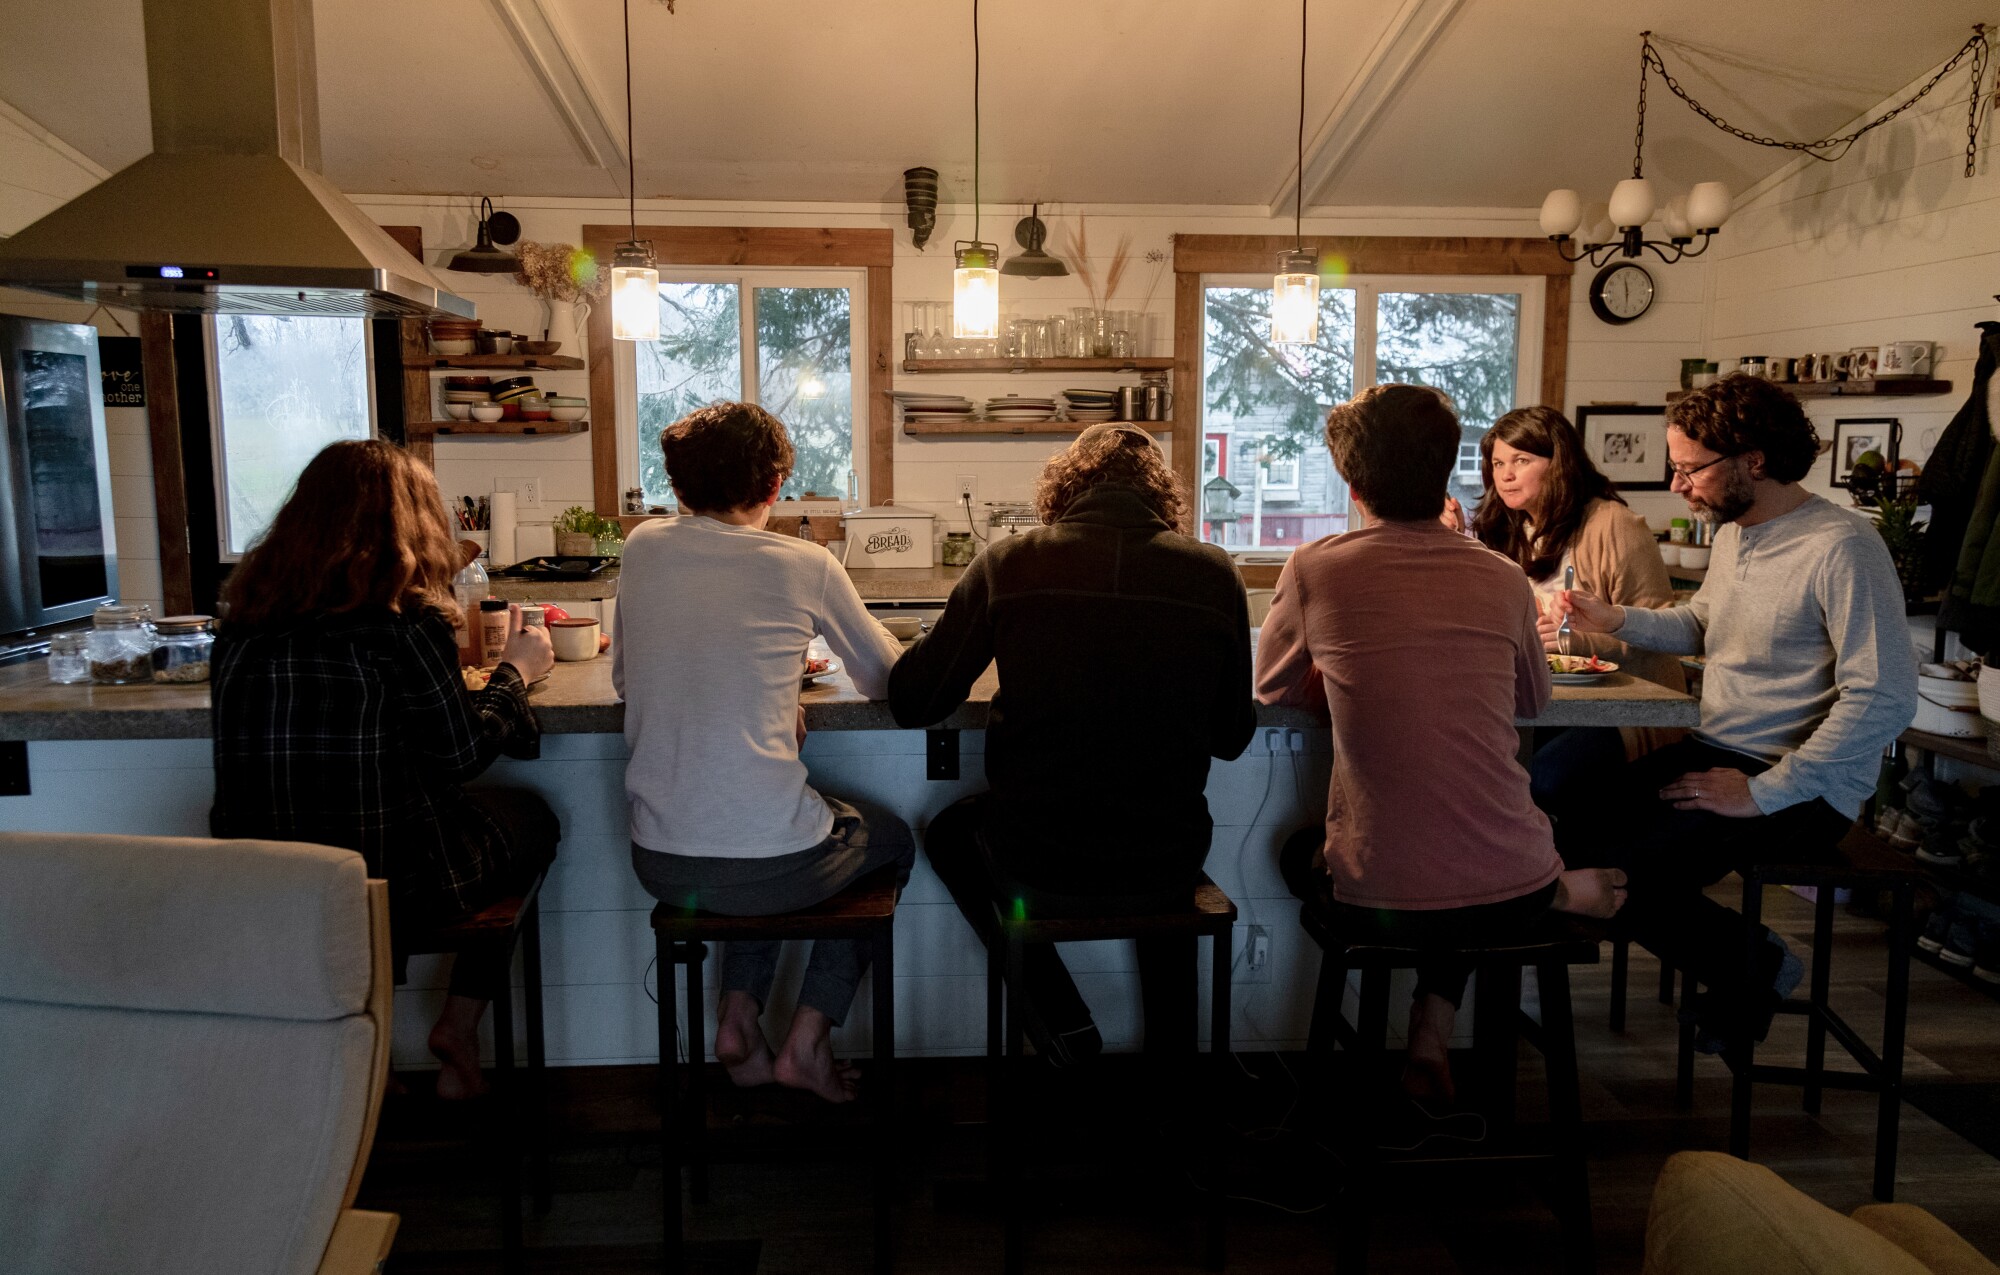 Six people sitting on stools and eating at a kitchen counter